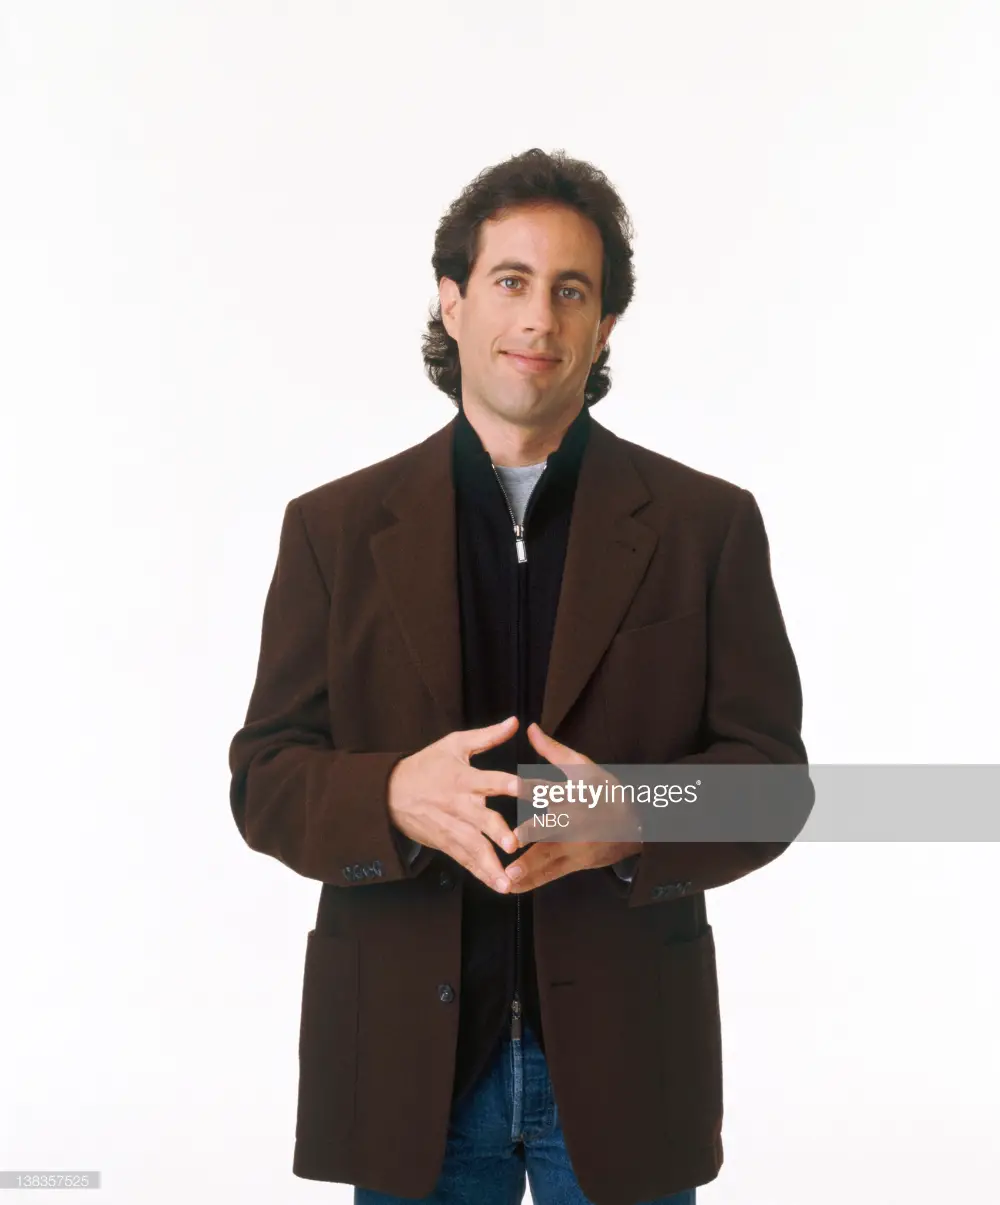 75-modern-mullet-haircut-ideas-for-men-trending-this-year The Jerry Seinfeld Mullet